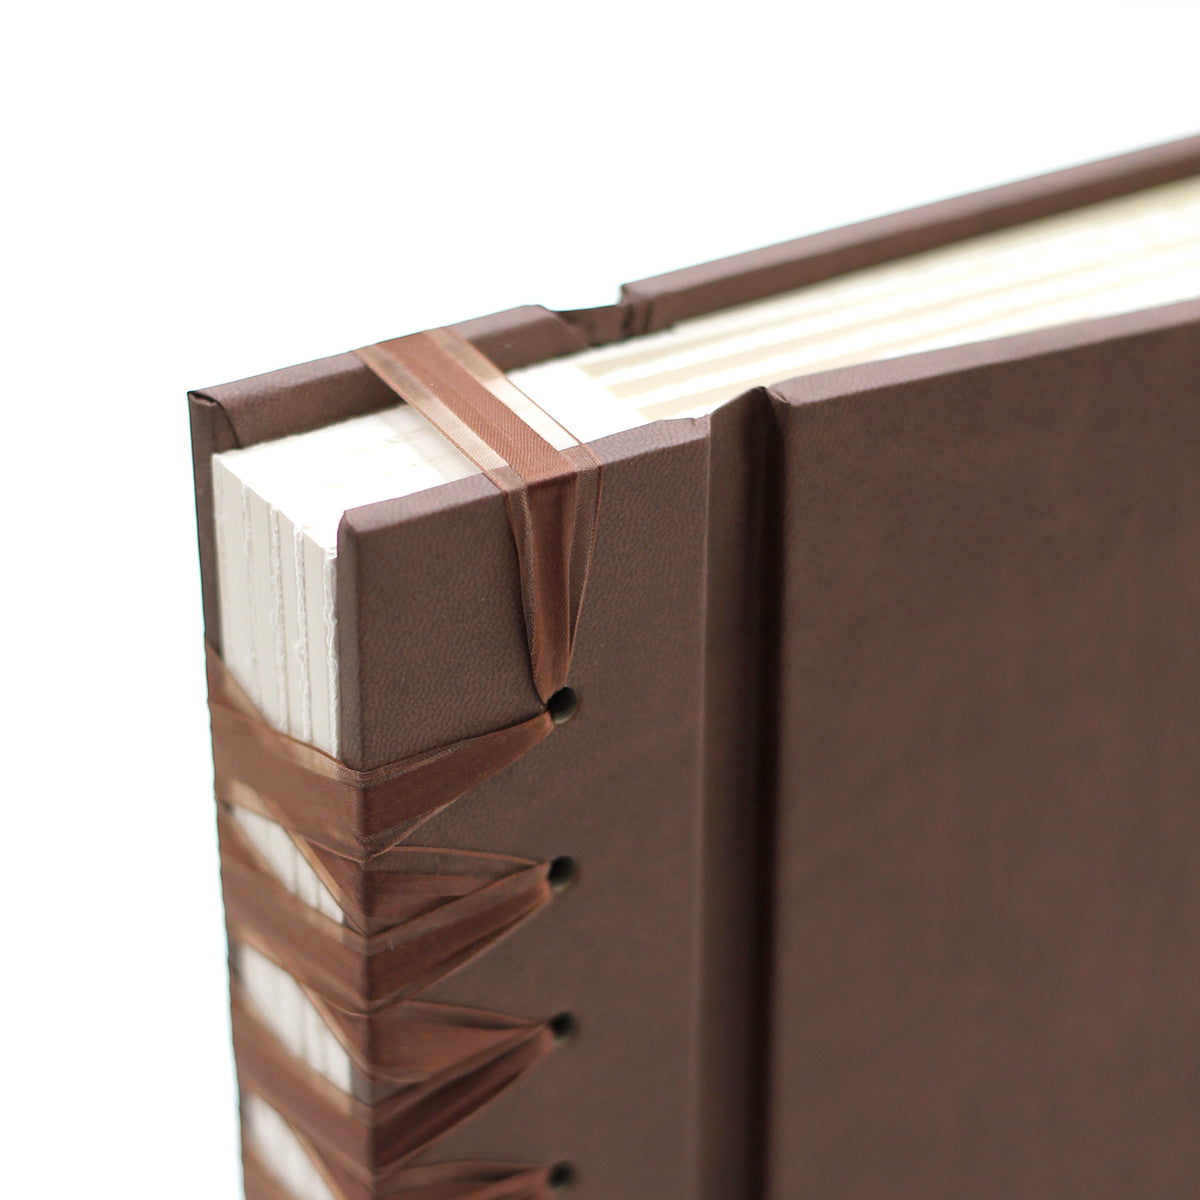 Deluxe 12 x 15 Paper Page Album | Cover: Mocha Vegan Leather | Available Personalized